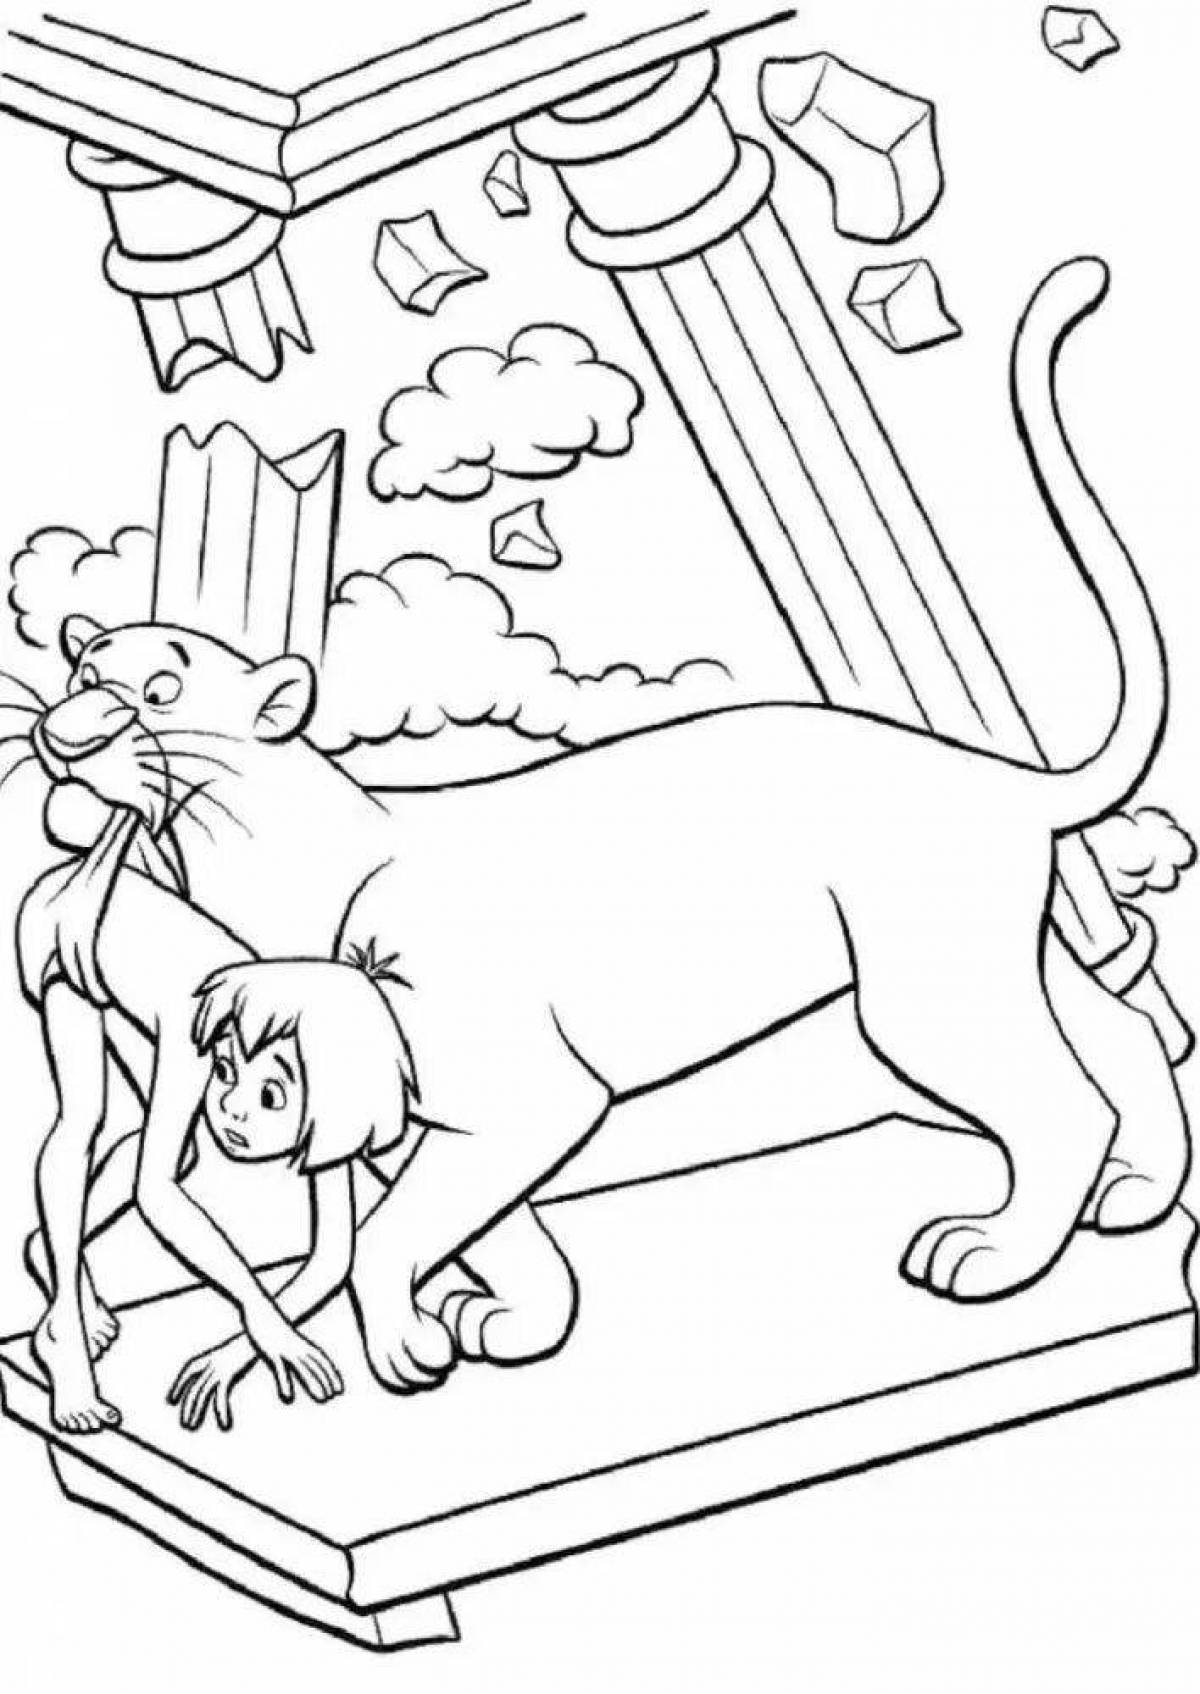 A fun panther coloring book for kids